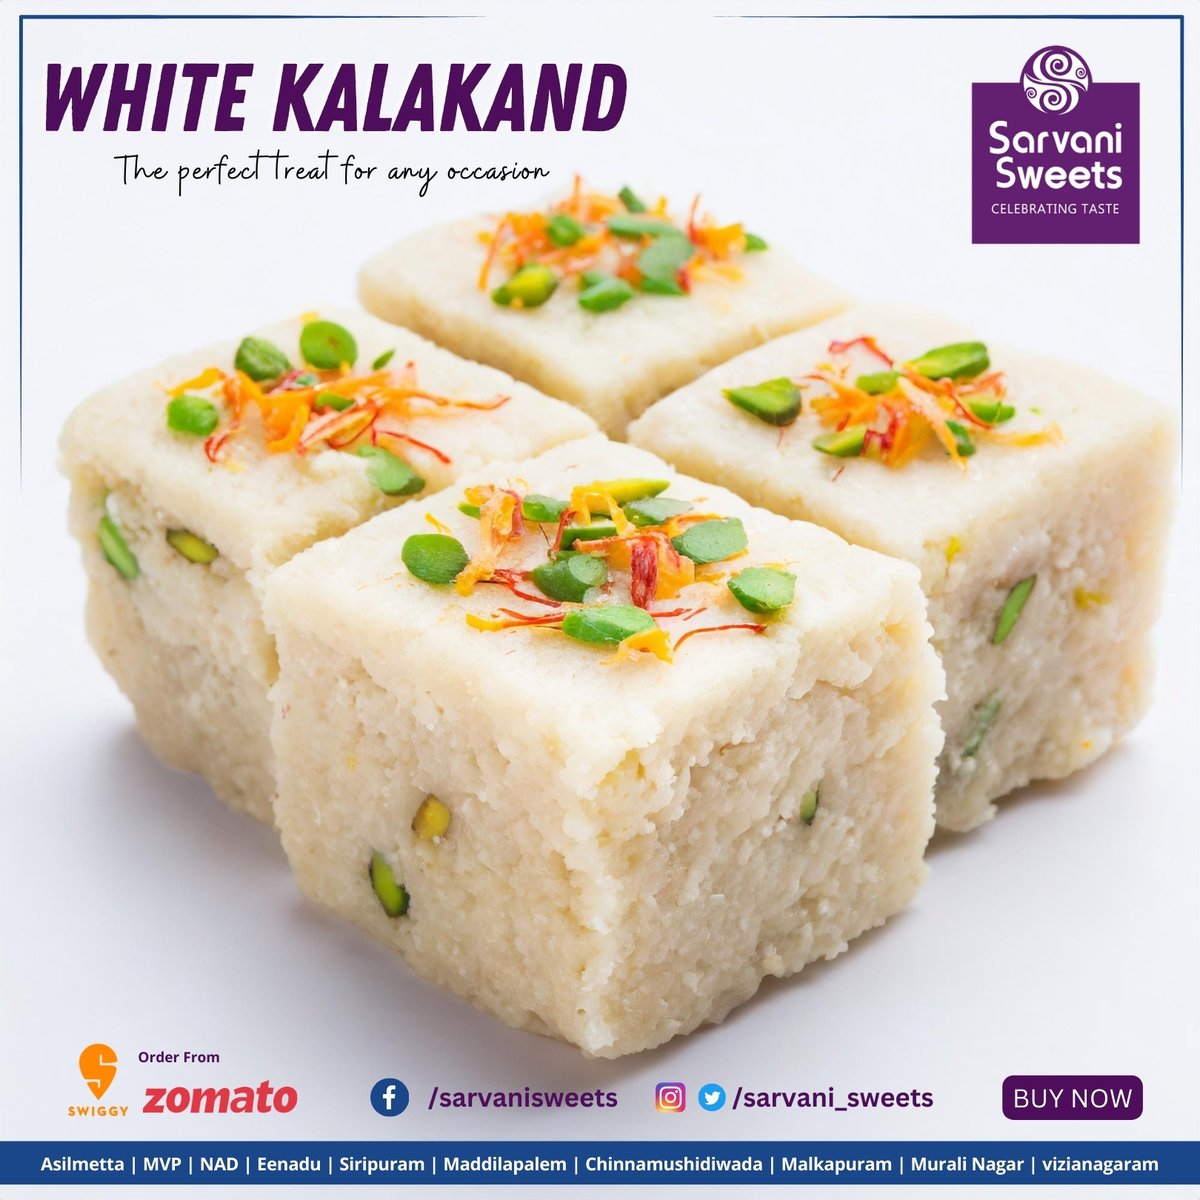 White kalakand, also known as milk cake, is a classic Indian sweet that is popular for its simplicity and melt-in-your-mouth texture.

@Sarvani_Sweets

#whitekalakand #sweets #indiansweets #yummy #traditionalsweets #sarvanisweets #tasty